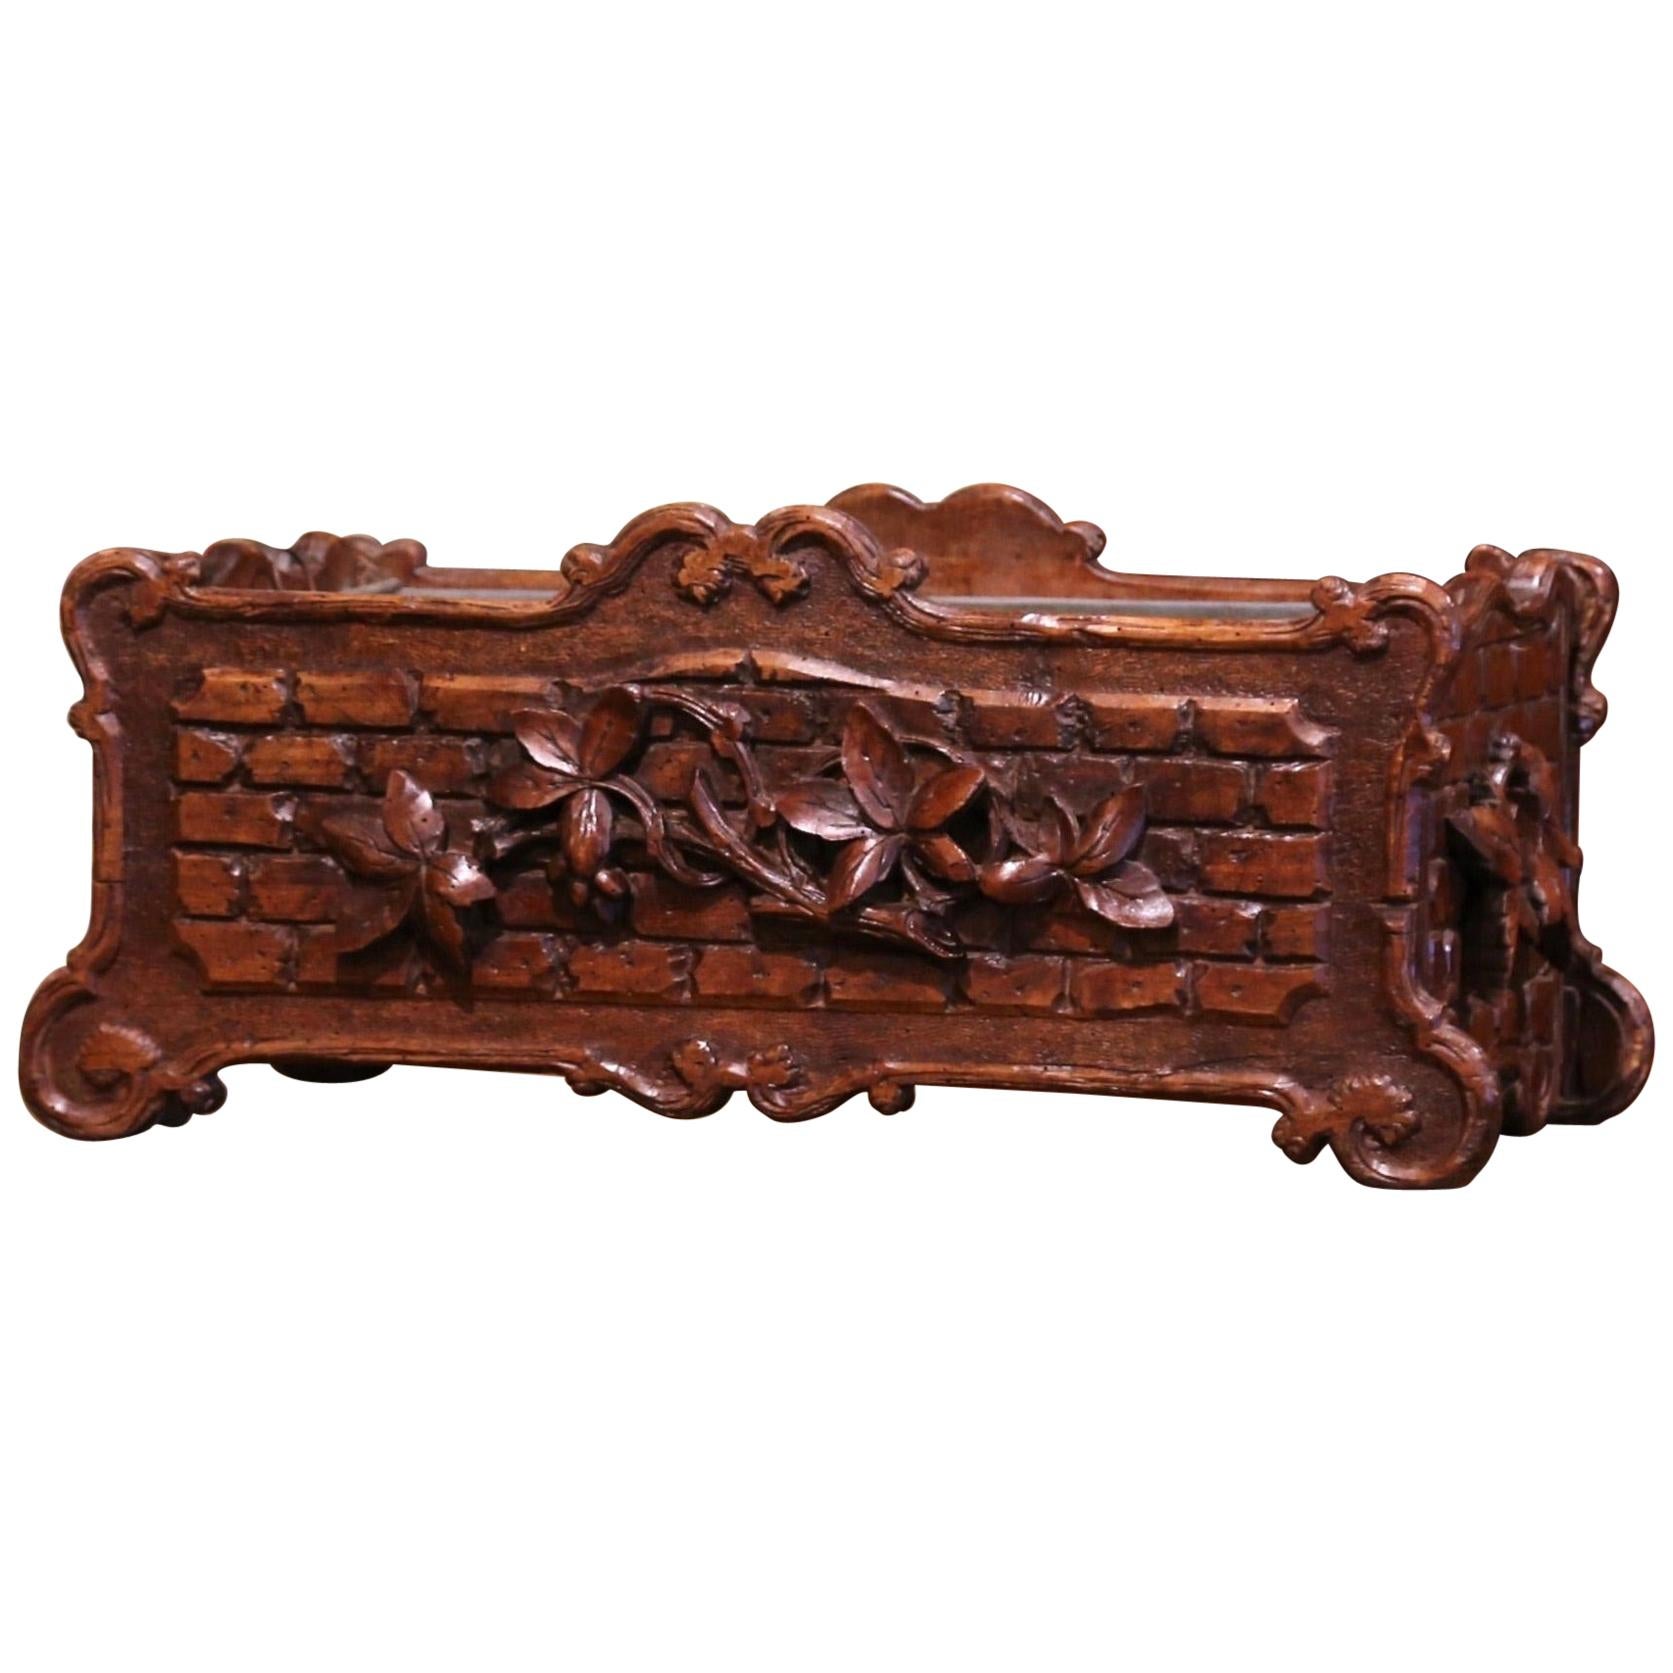 19th Century French Black Forest Carved Walnut Jardiniere with Floral Motif